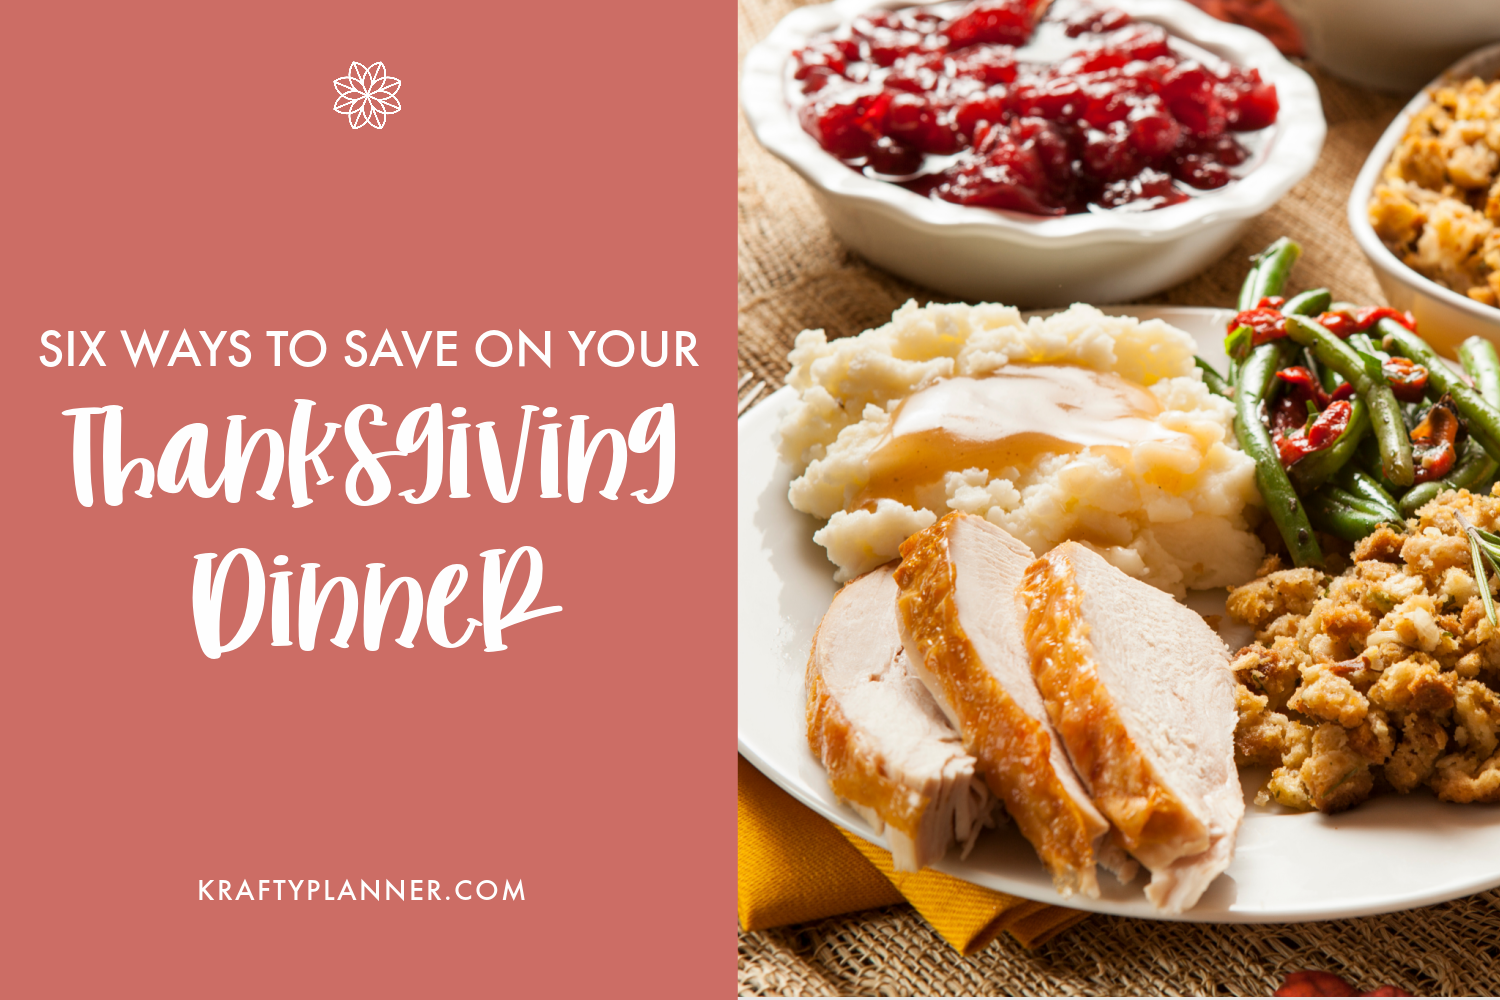 Six Ways to Save on Your Thanksgiving Dinner